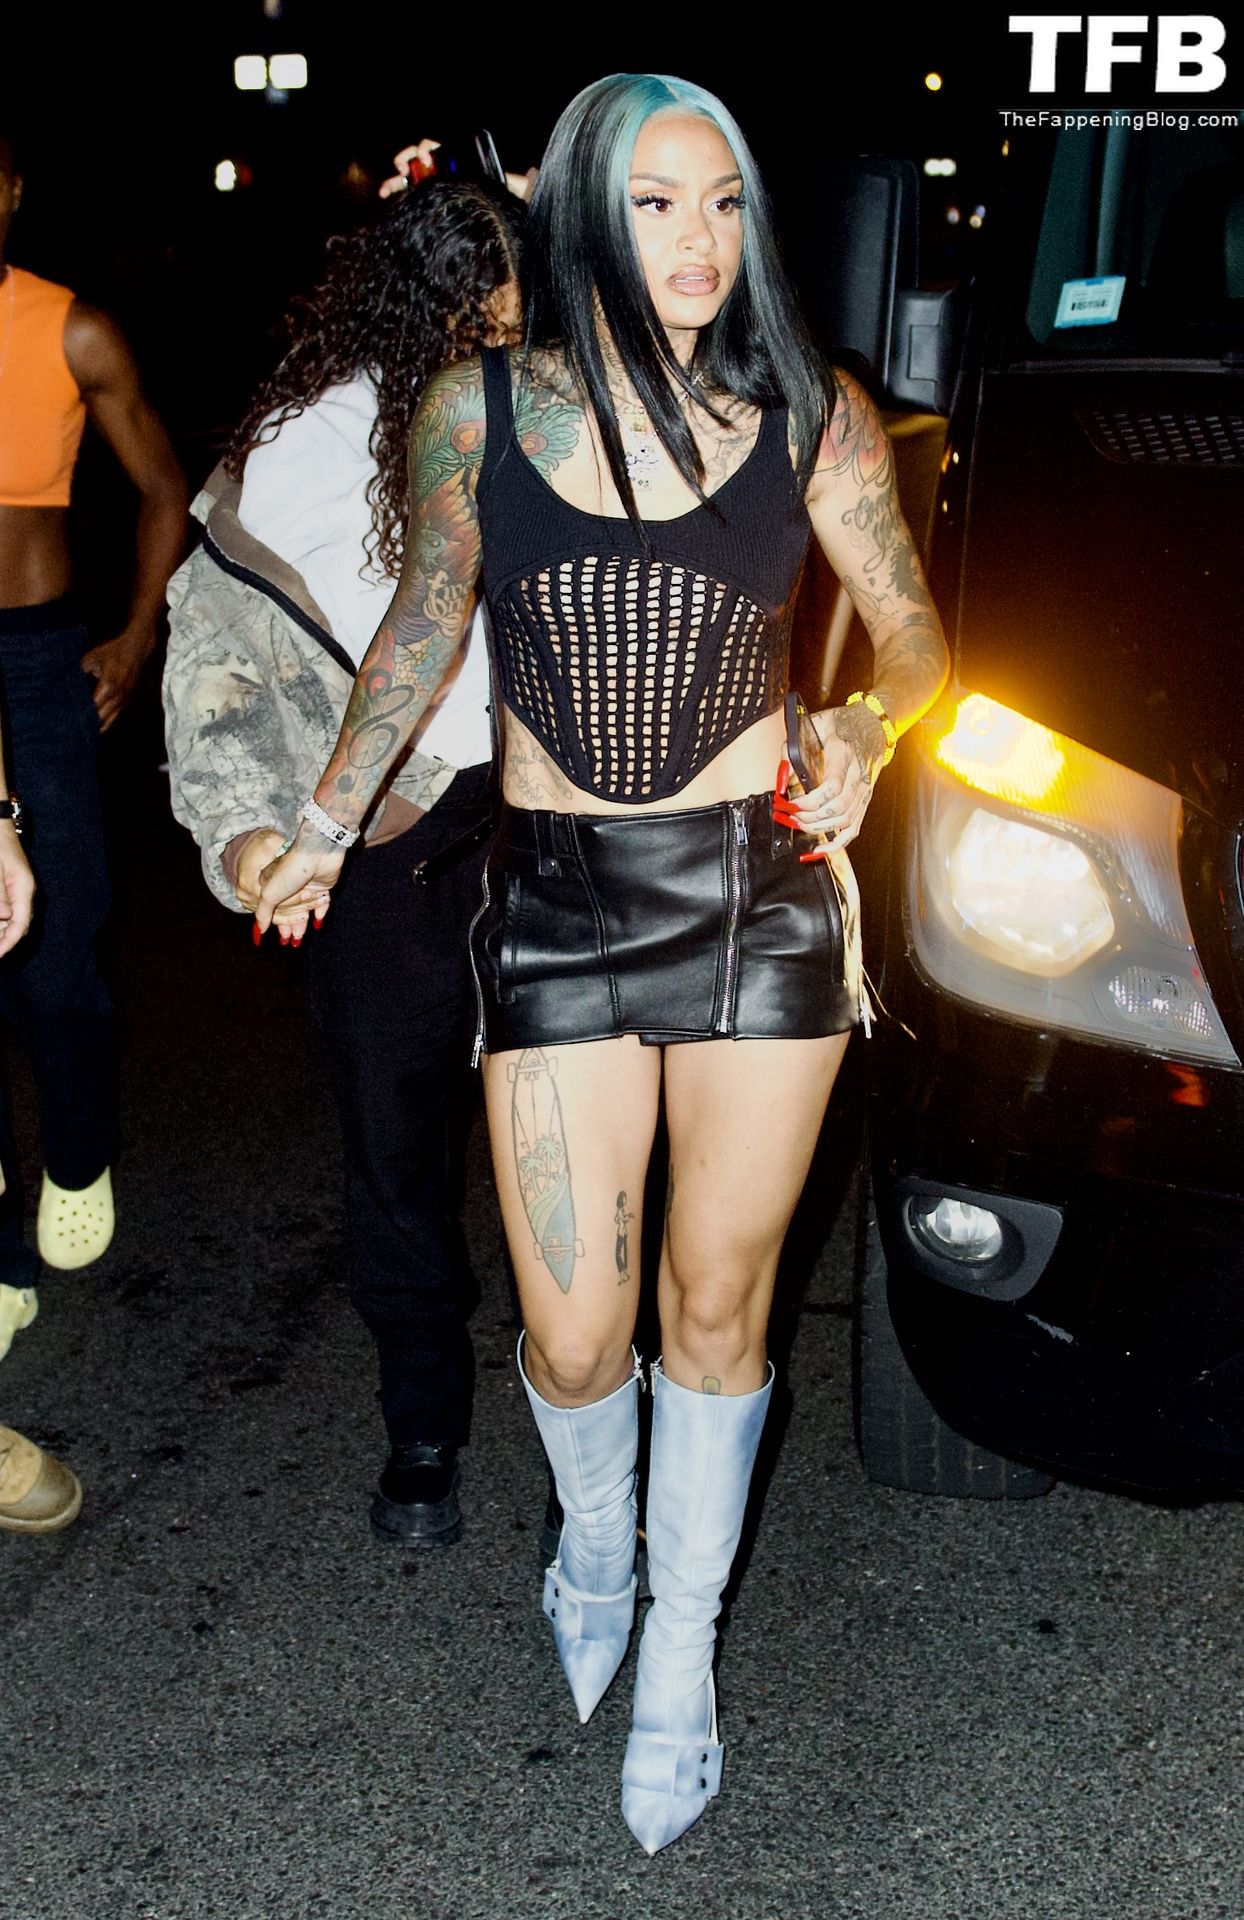 Kehlani See Through Nudity The Fappening Blog 8 - Kehlani Flashes Her Nude Tits in NYC (17 Photos)